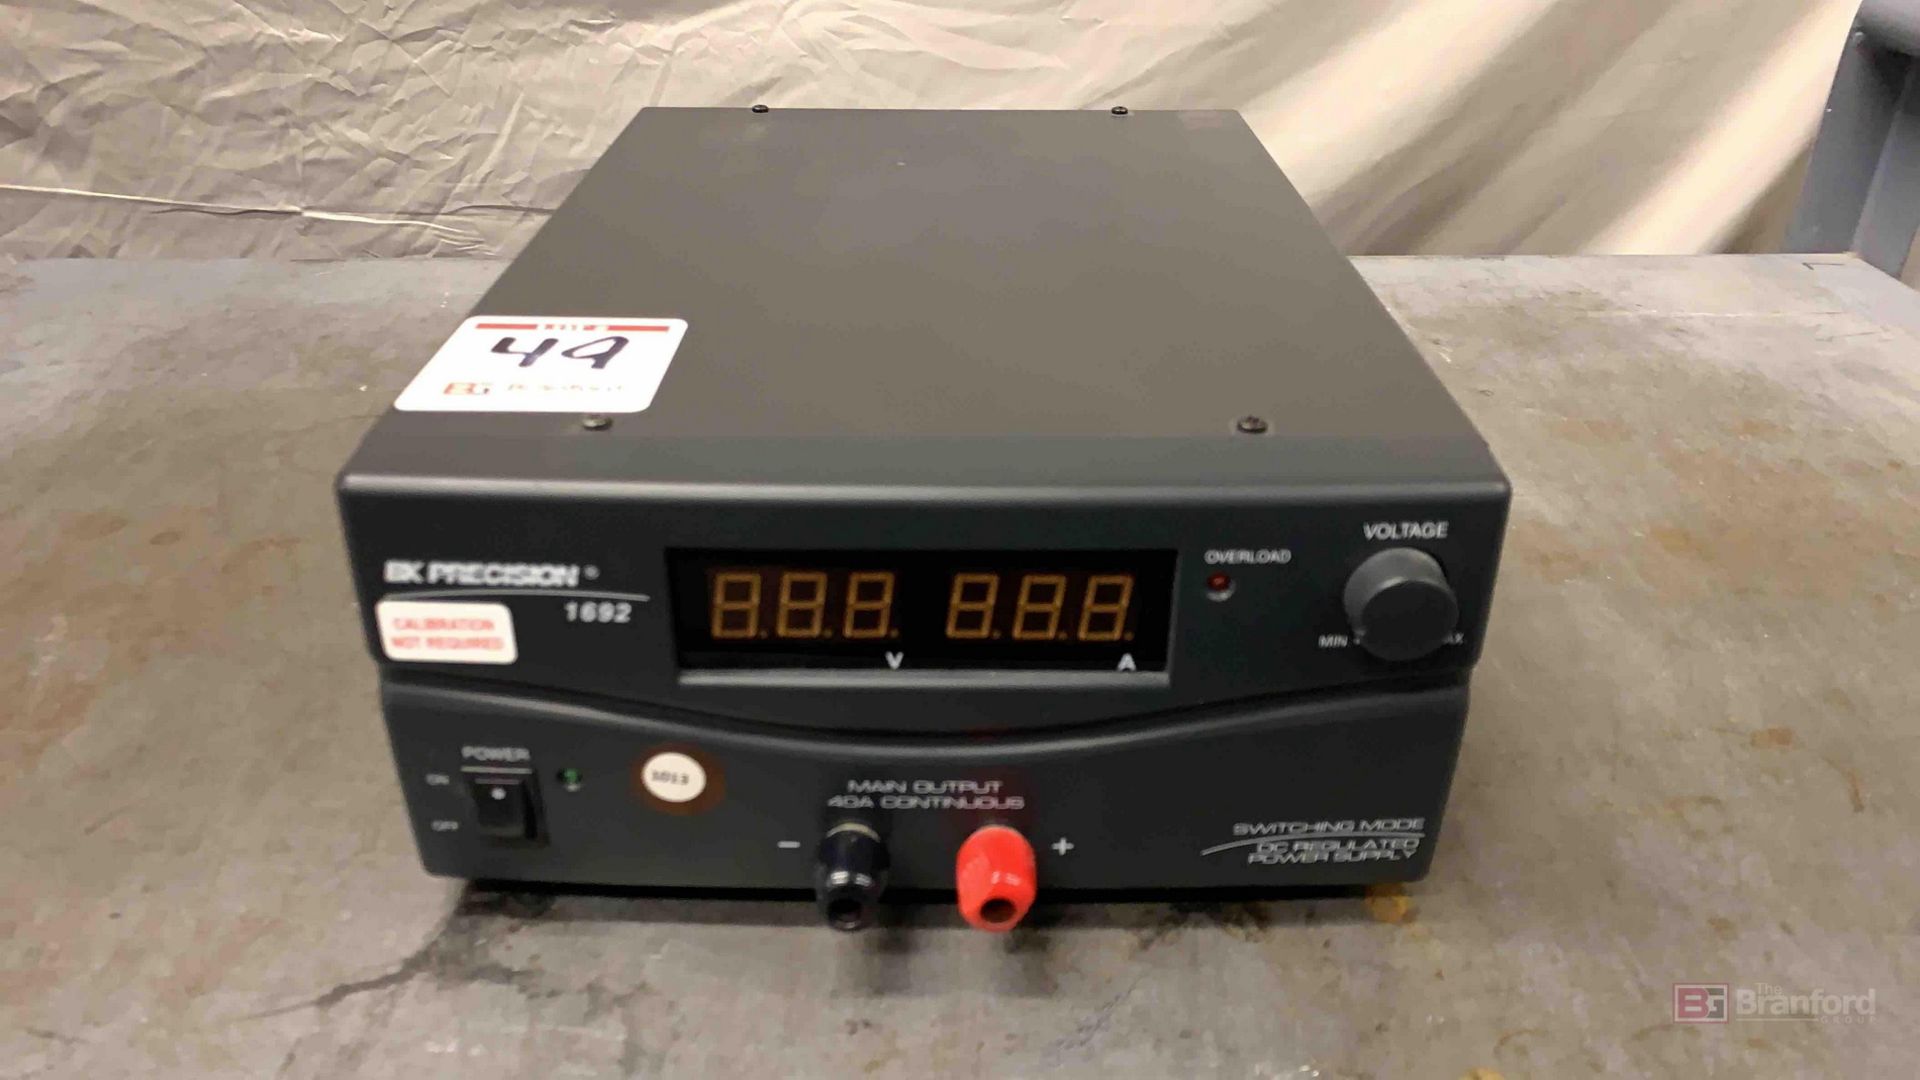 BK Precision 1692 DC power supply - Image 2 of 3